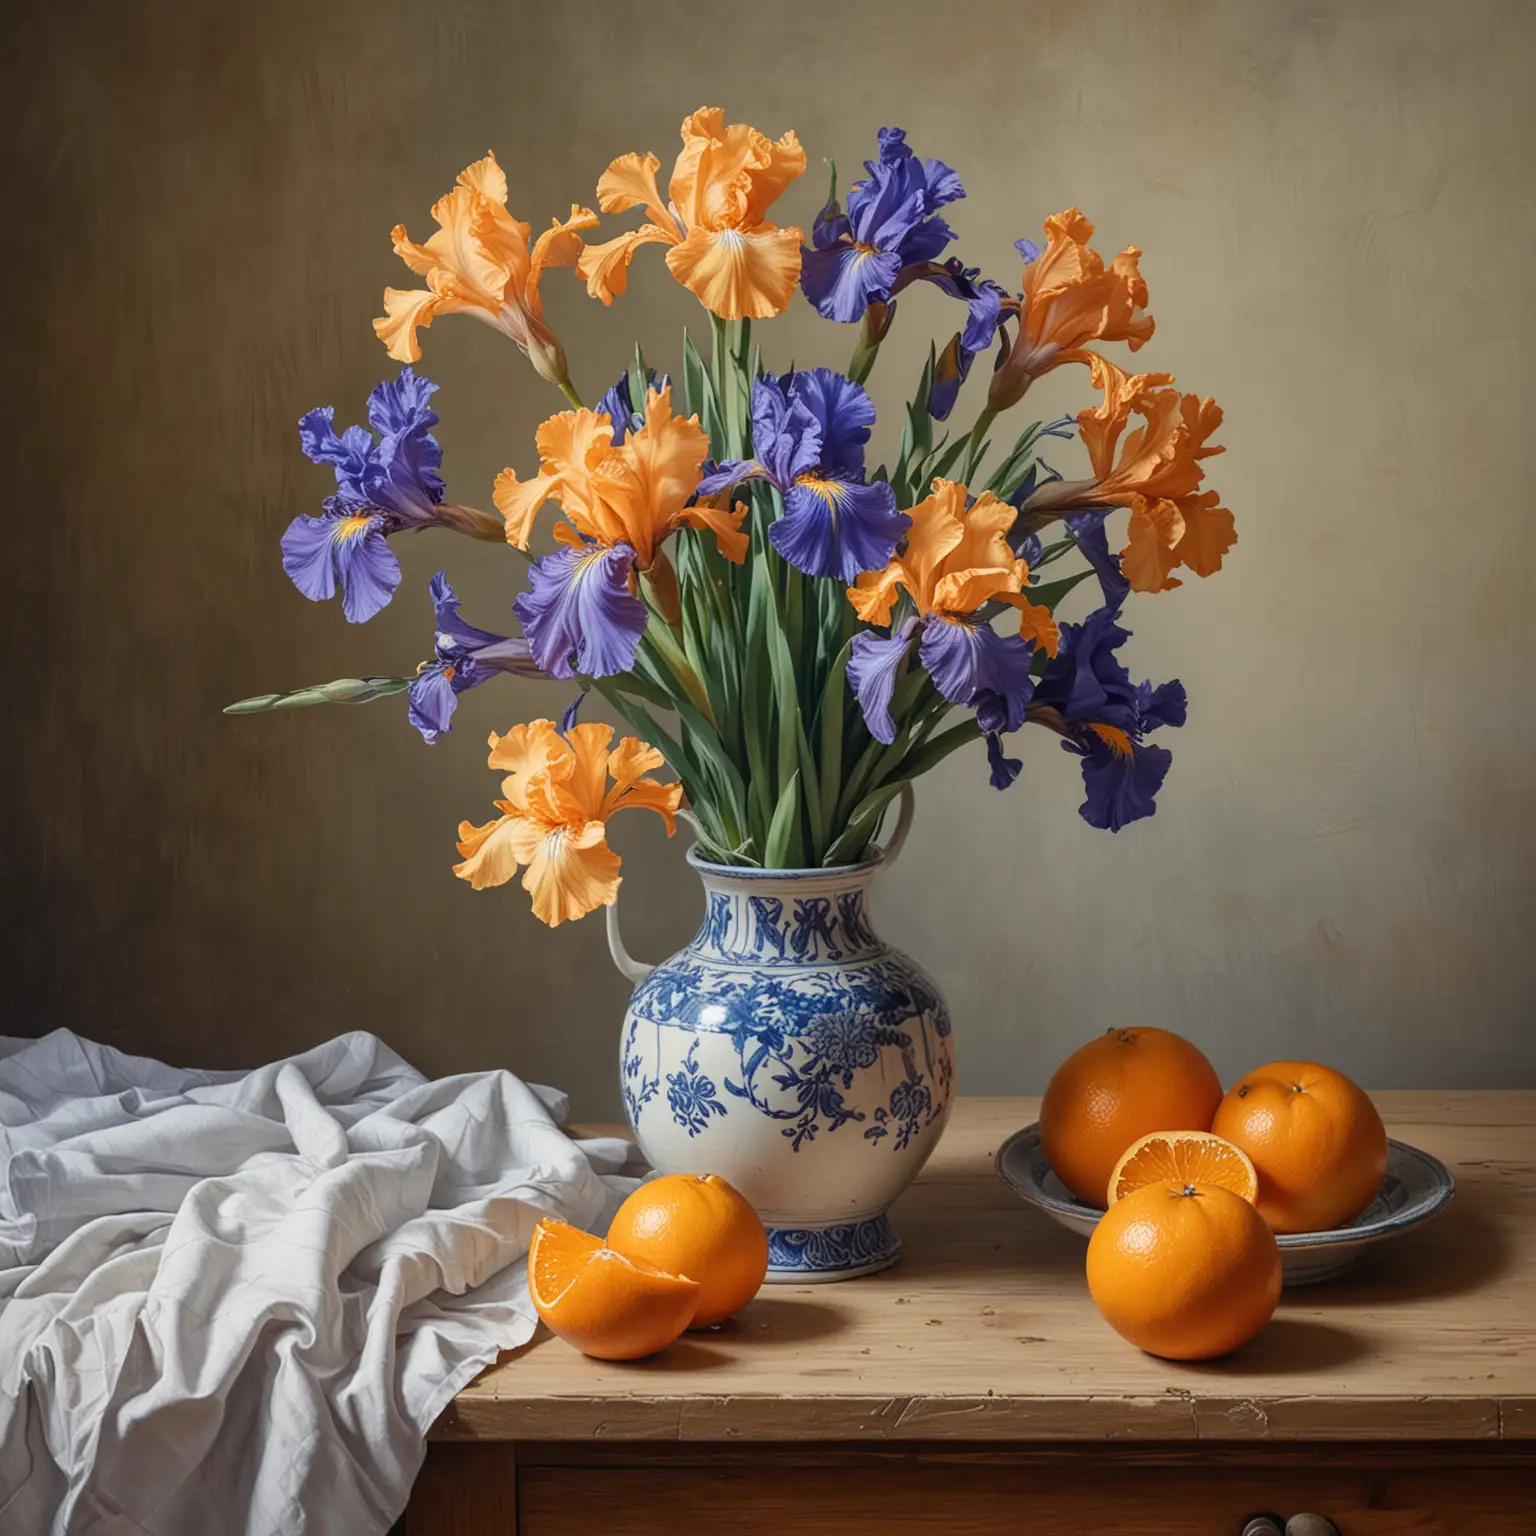 A STILL LIFE PAINTING OF A VASE OF IRIS FLOWERS  ON A TABLE,  WITH ORANGES 